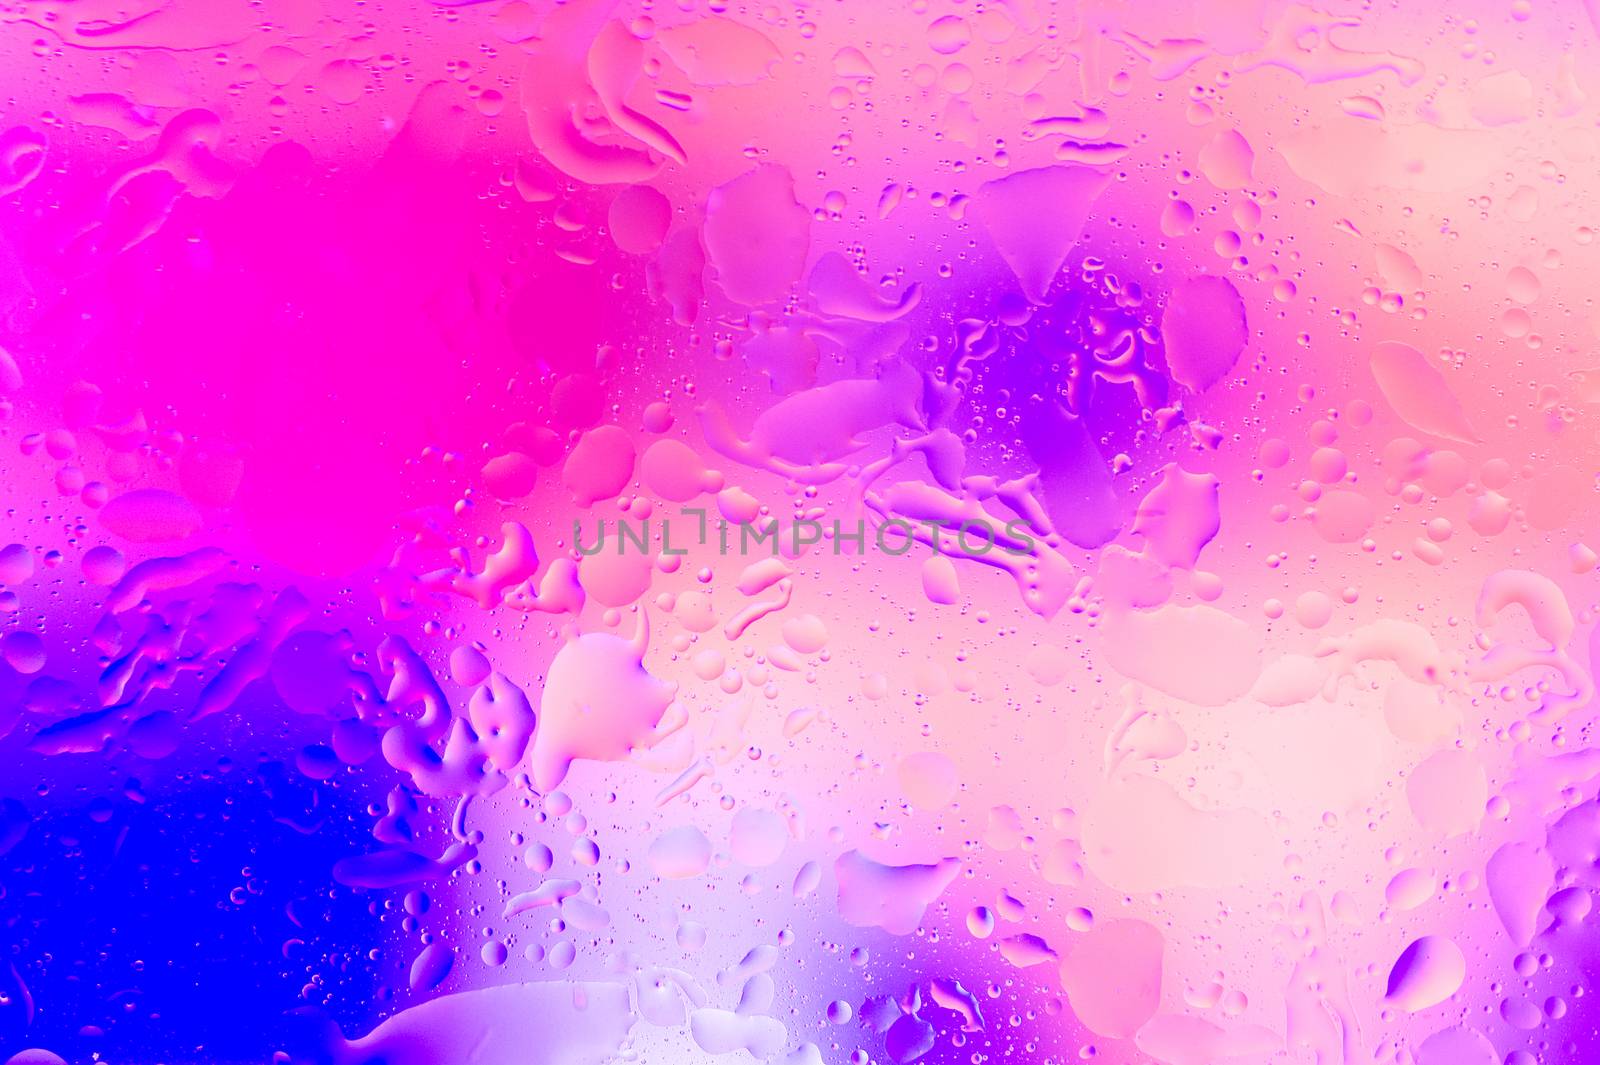 The hue purple abstract composition of oil drops in water with soft focus effect.